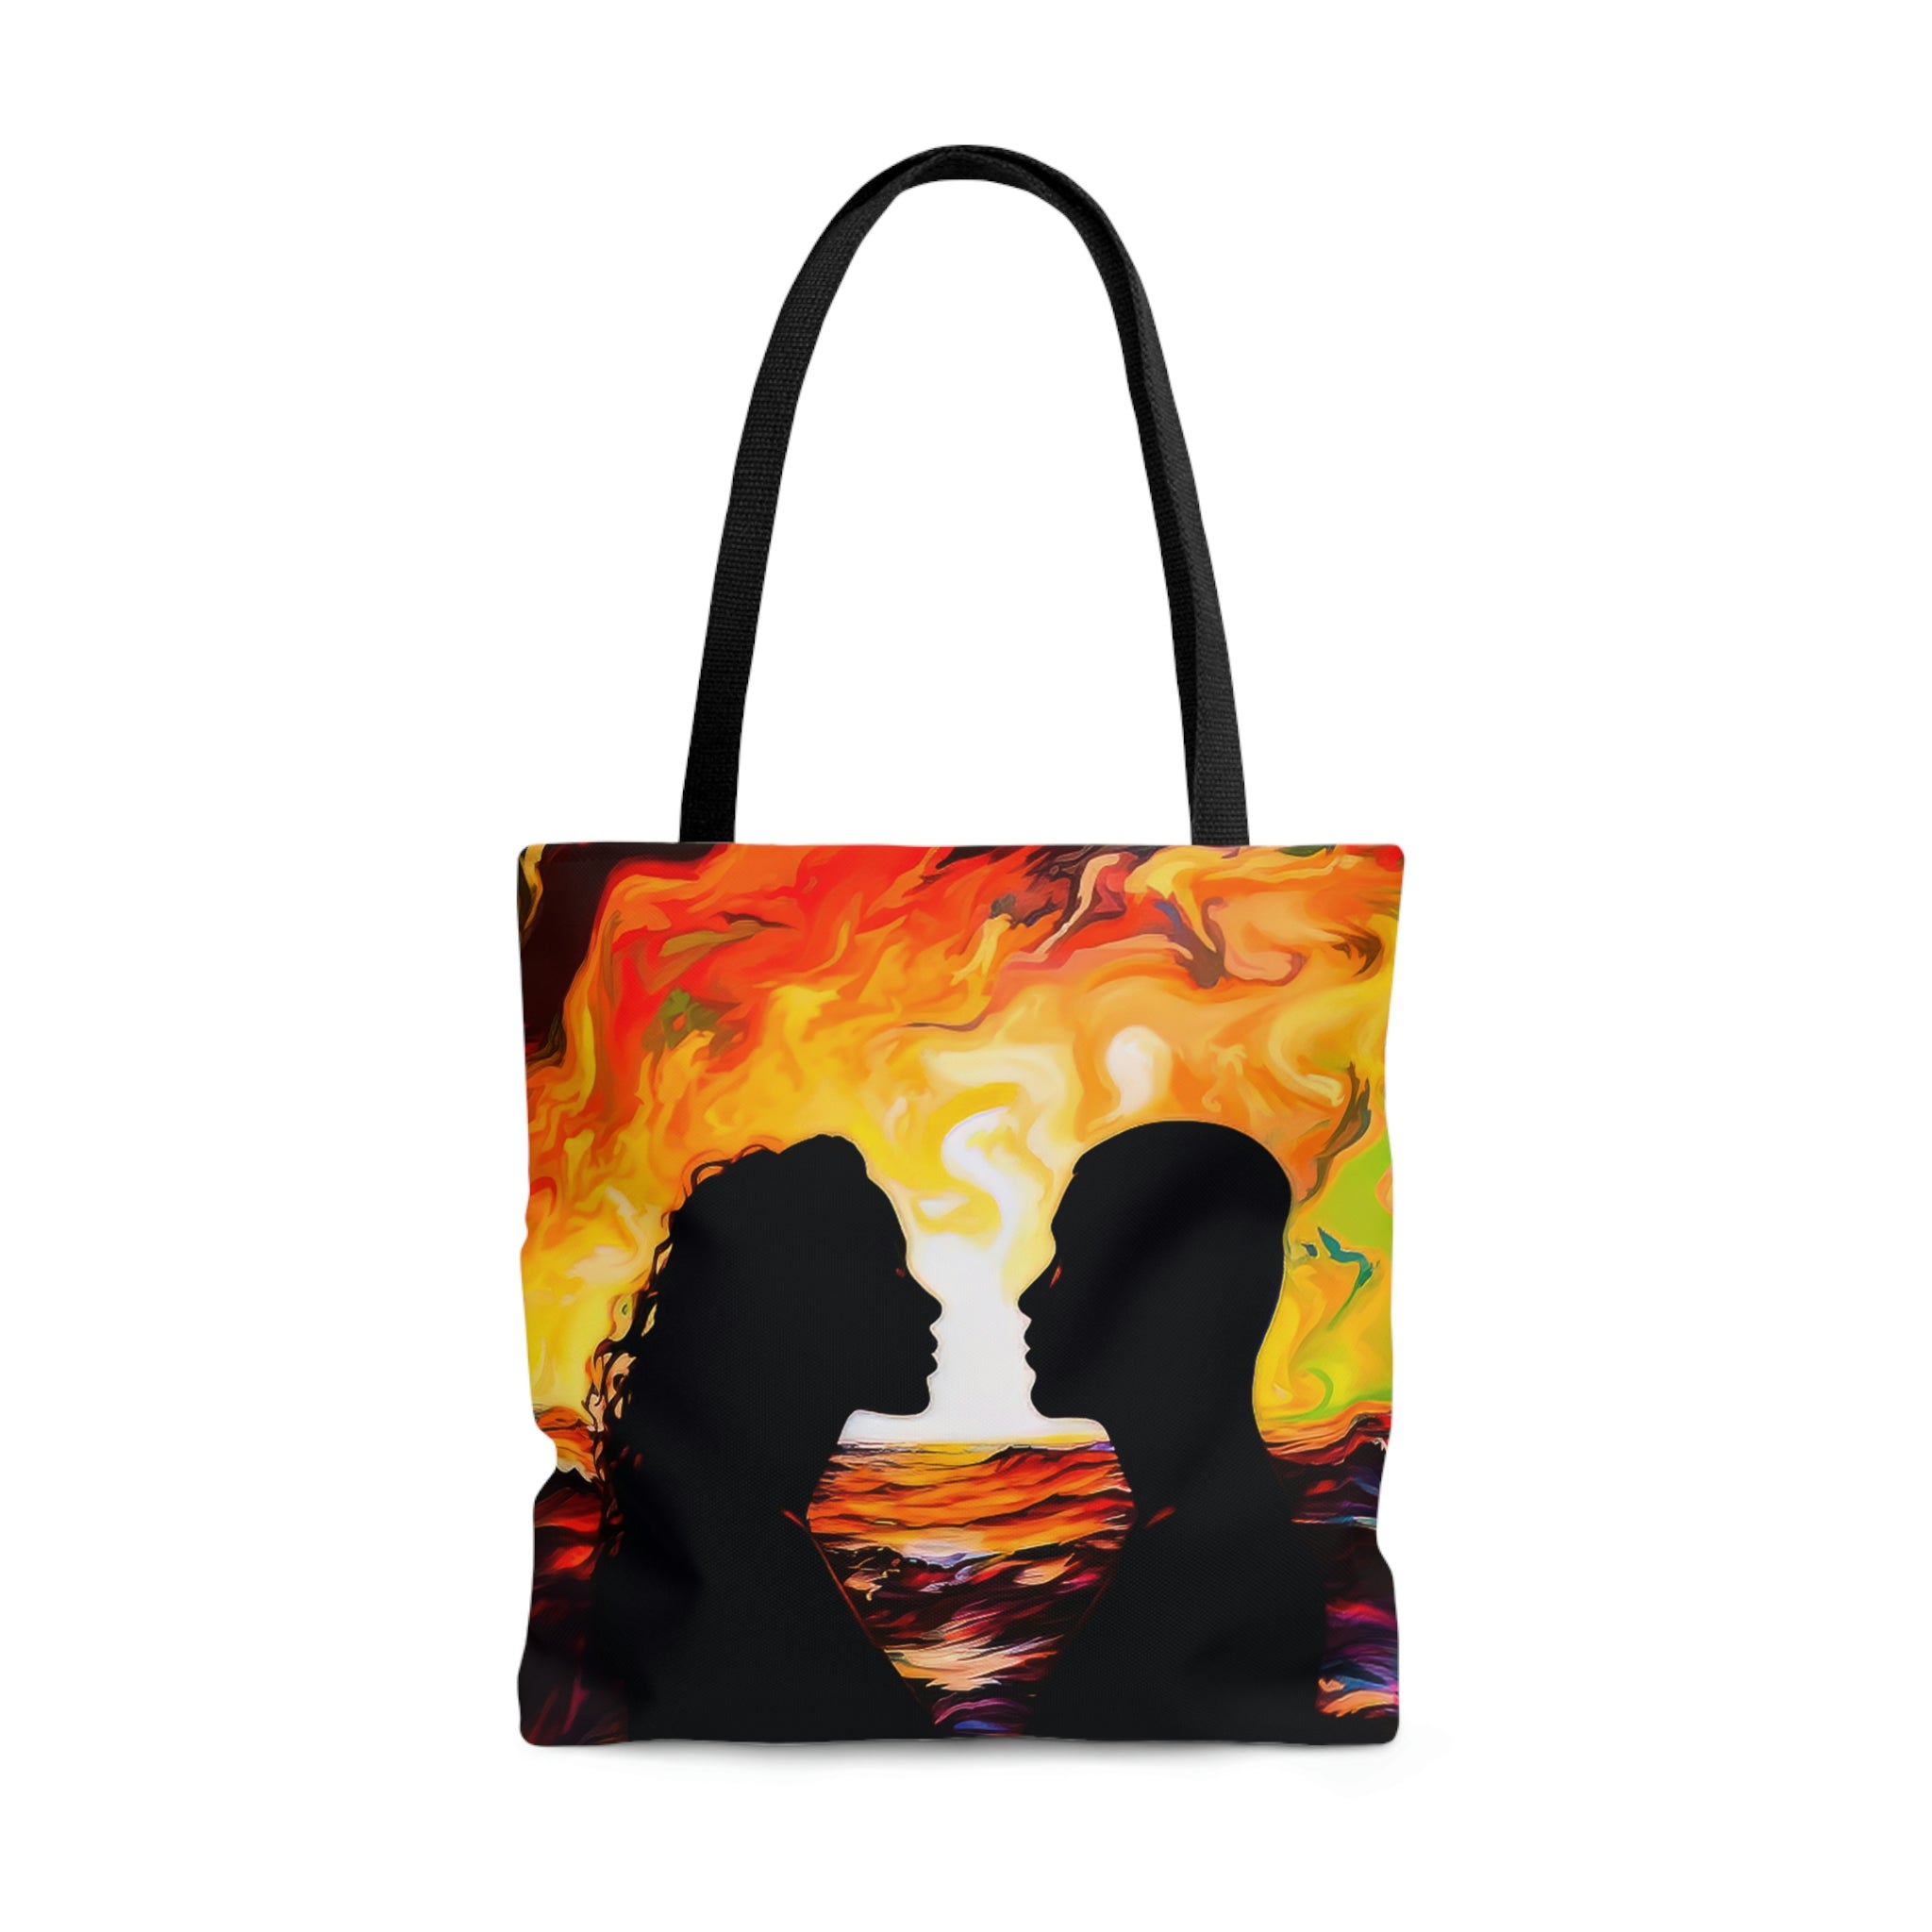 "LOVERS FIRE" - AFRICAN AMERICAN THEMED Tote Bag